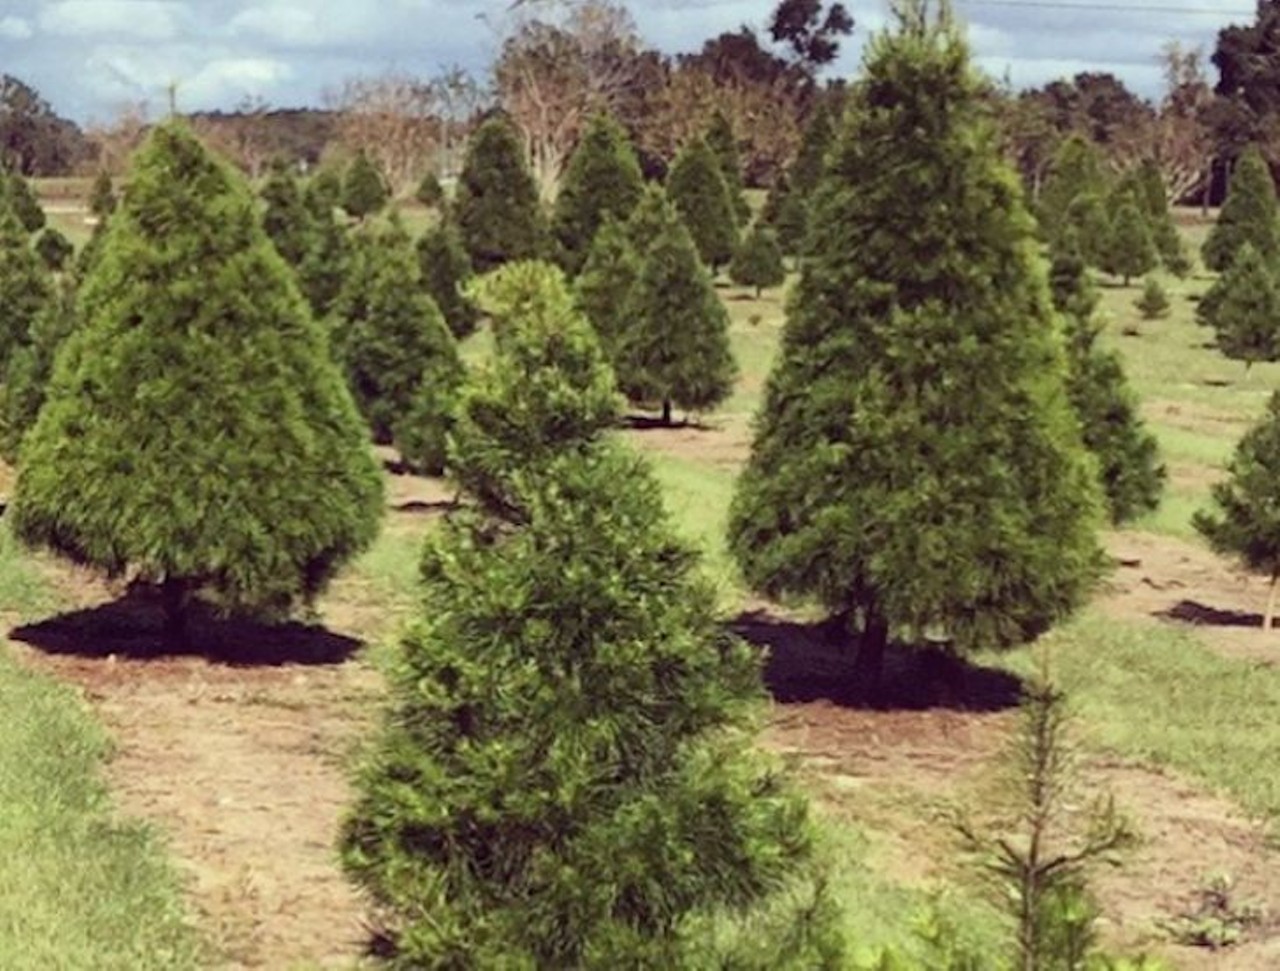 Nicholas&#146;s Christmas Tree Farm
14260 SE 80th Ave., Summerfield; 352-245-8633 
The calm of the Nicholas&#146;s farm alone is worth the drive, so pack up the family (don&#146;t forget a blanket for your tree) and hit the road. Did we mention each tree is $6 per foot and the farm is open daily from 10 a.m. until dark? See, told you it was worth the drive.
Photo via jackiwolfe/Instagram